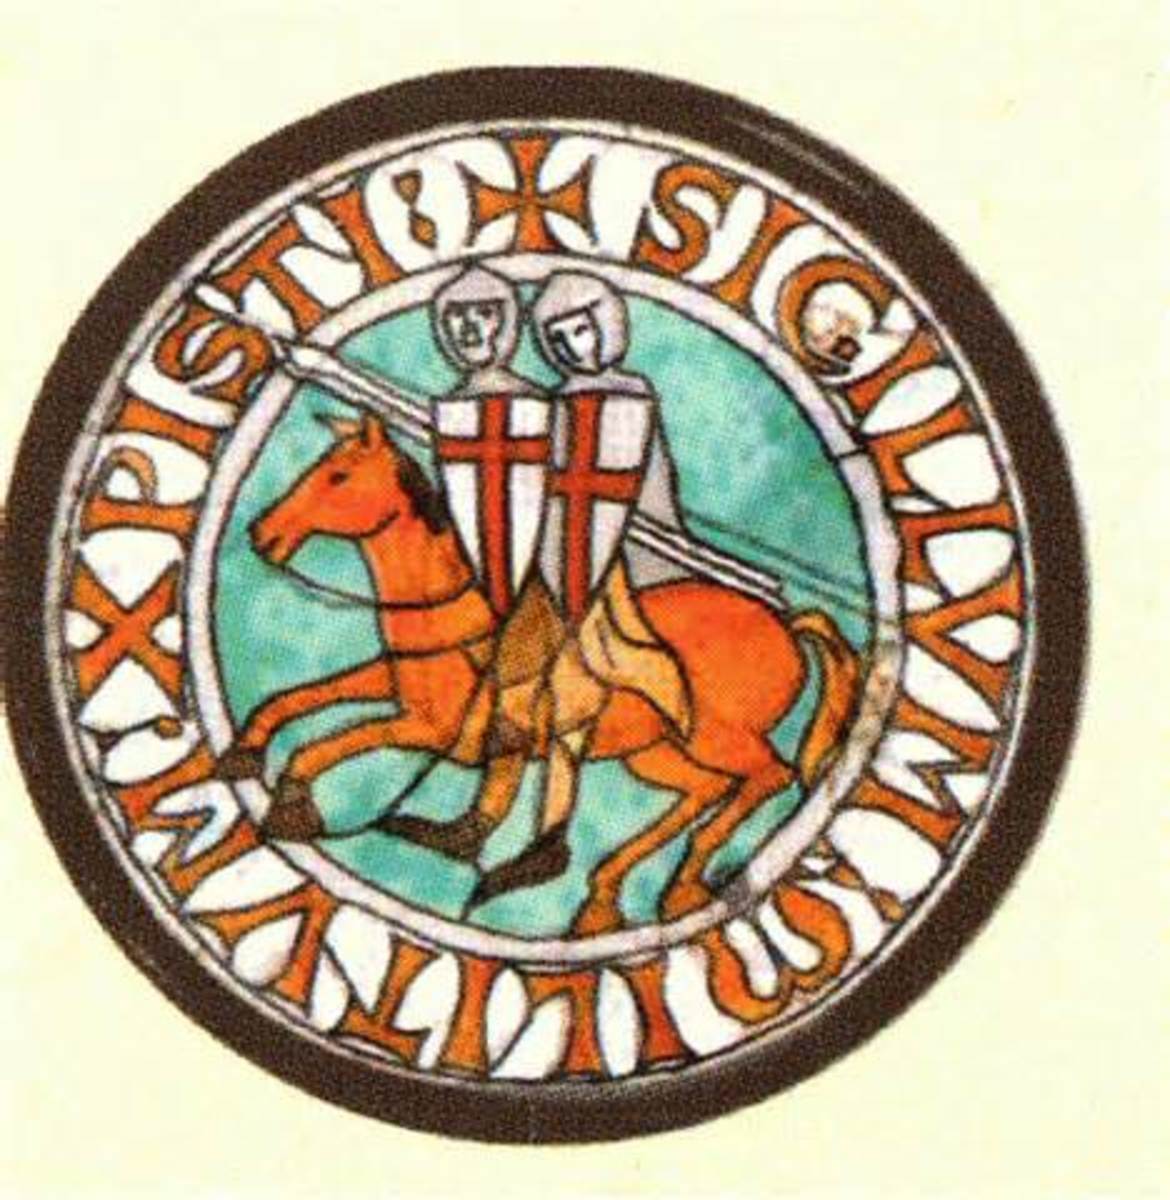 The seal of the Knights Templar shows their mission to escort pilgrims to the Holy Land and that they often rode double.